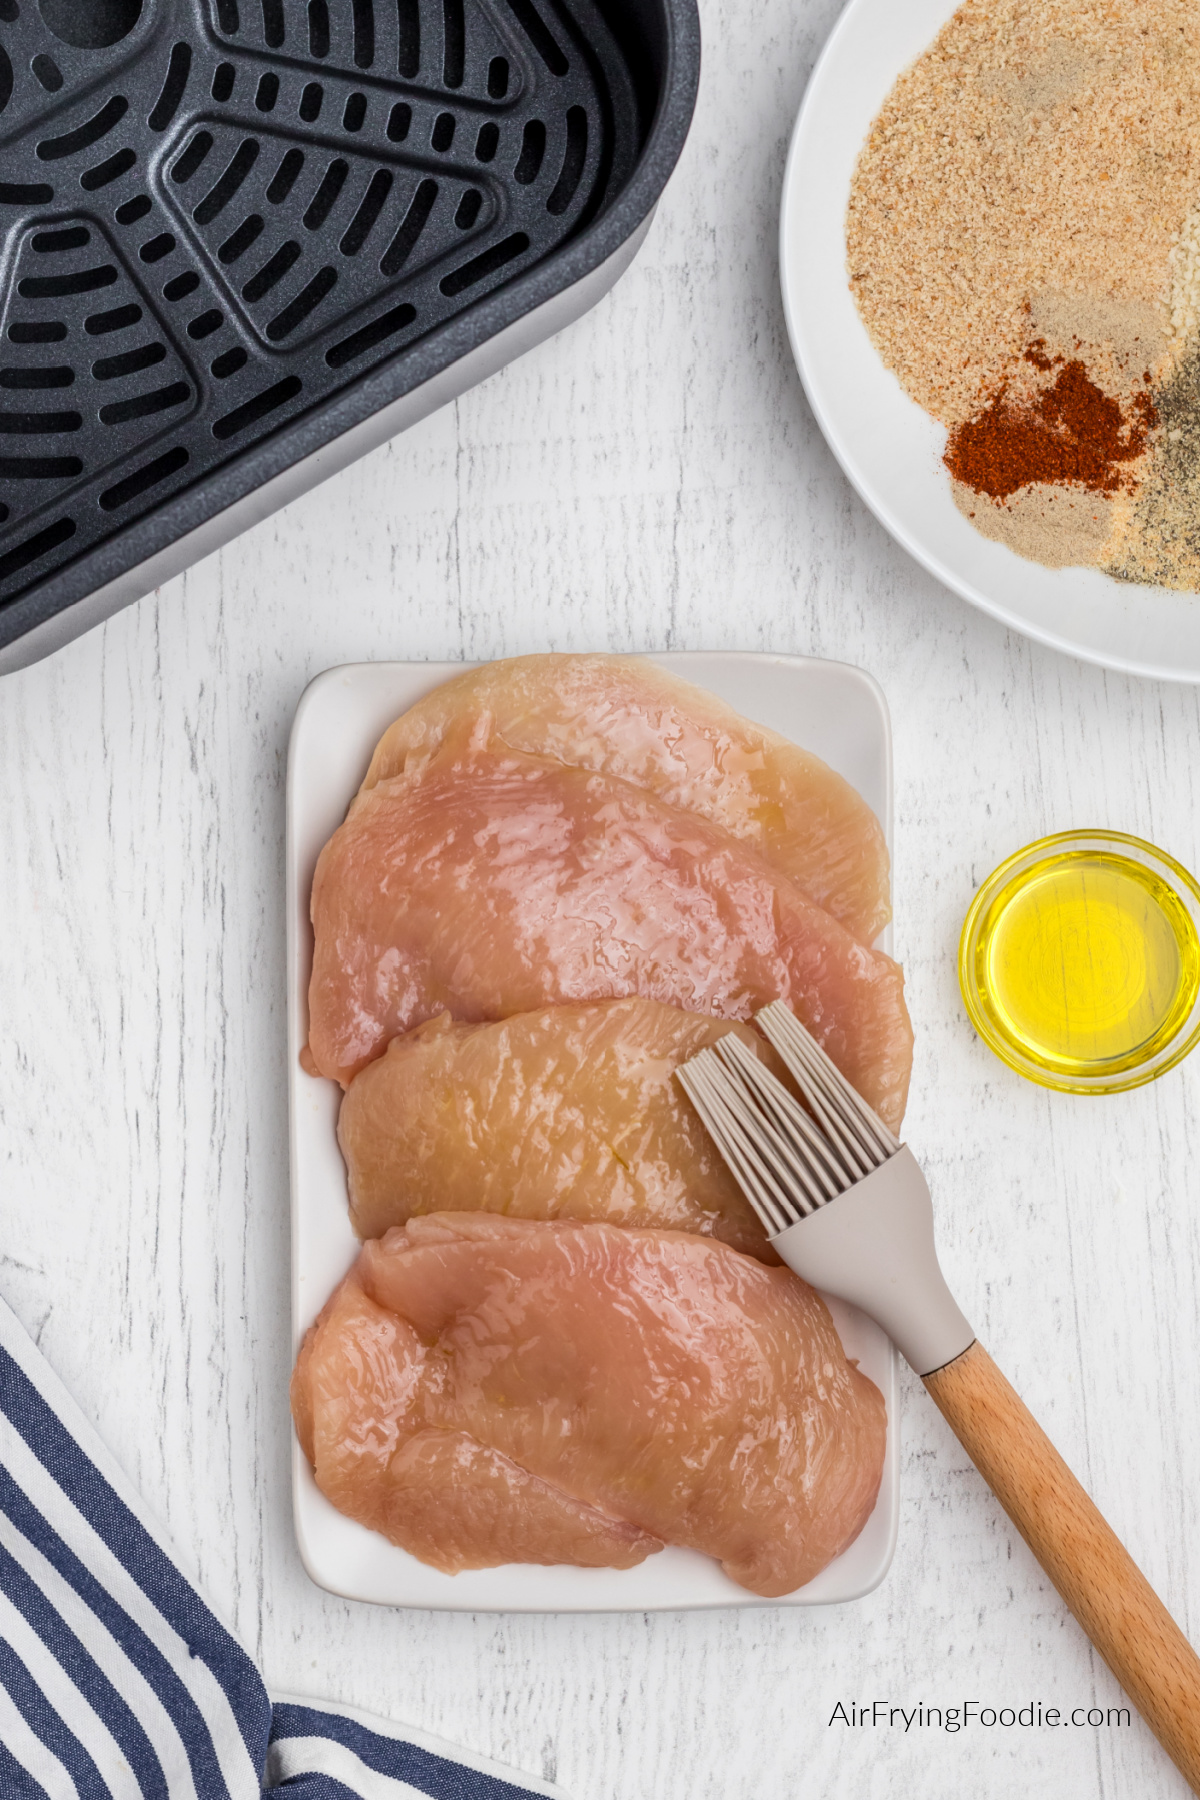 Chicken breast being brushed with olive oil.